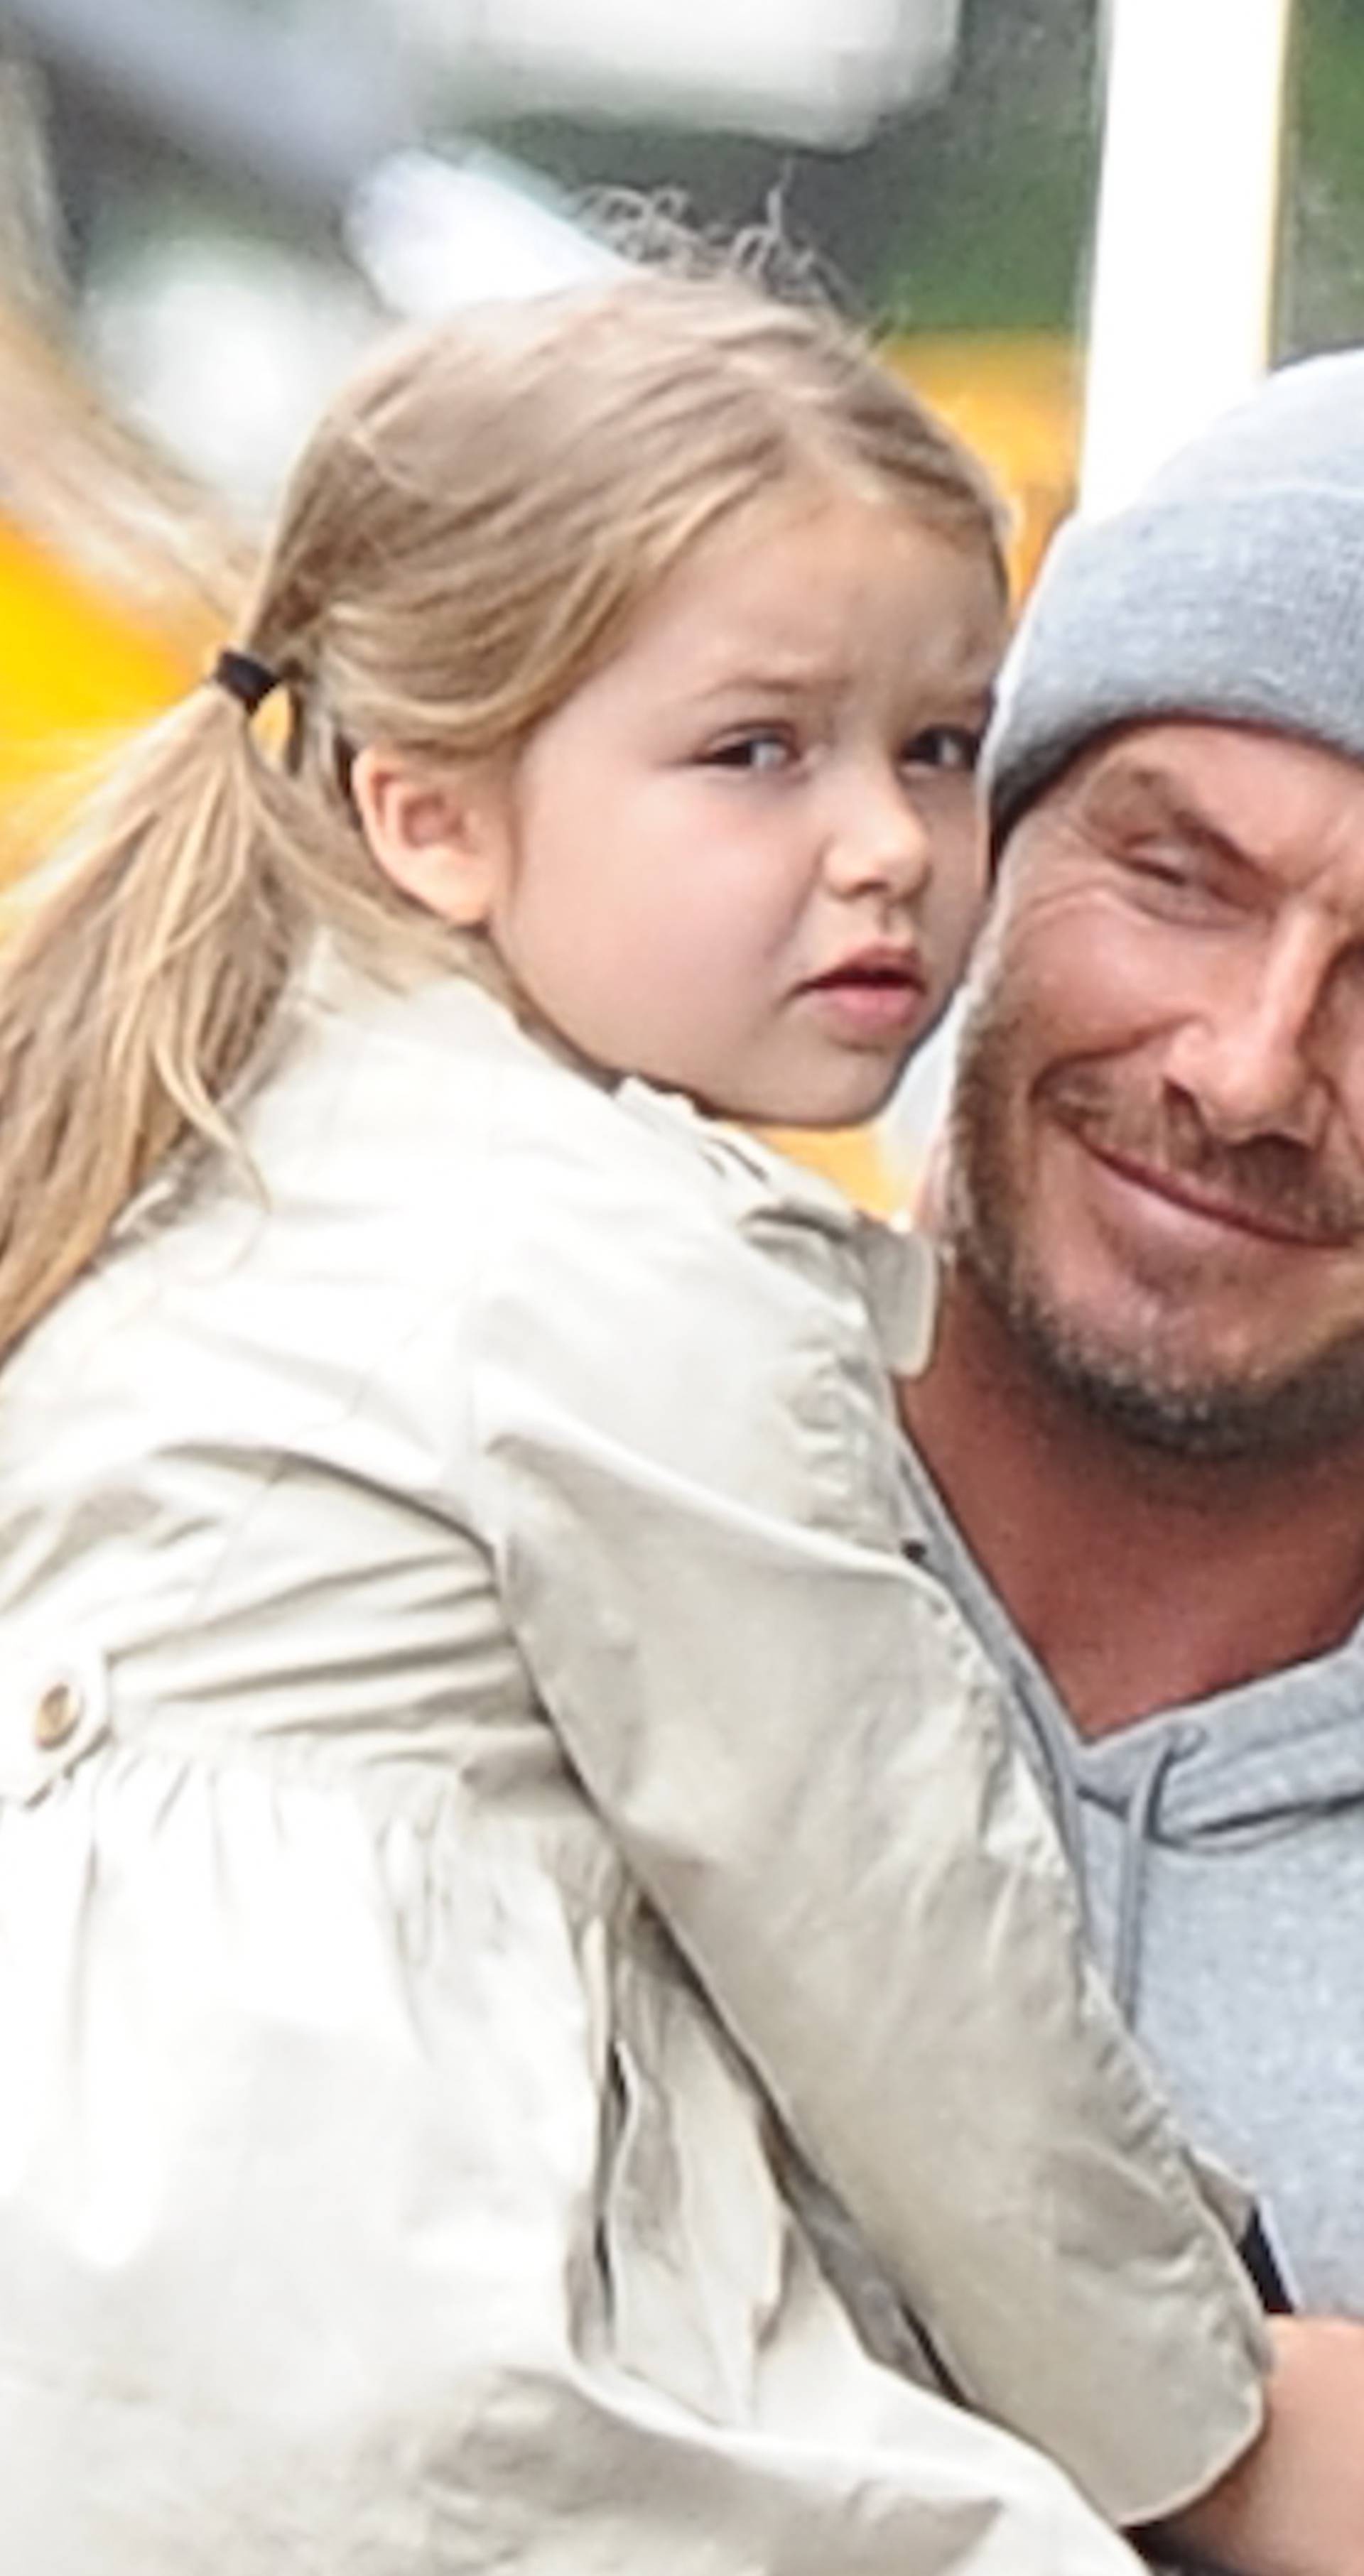 EXCLUSIVE David Beckham, Harper & Brooklyn Beckham are seen out at Grainger & Co restaurant in Notting Hill today, david looked happy with the kids as he treated them to Lunch, David was seen taking off on